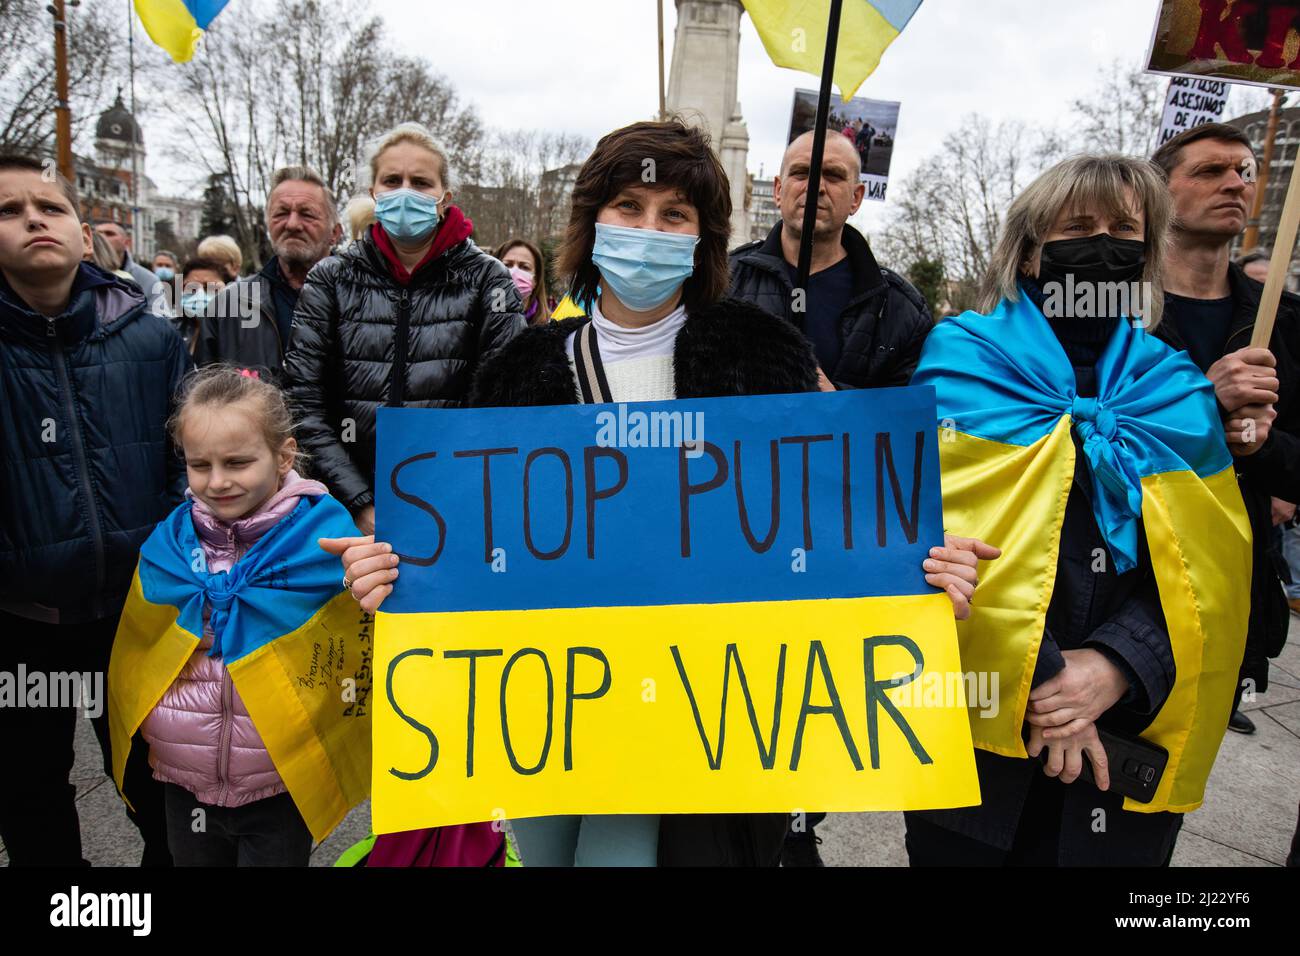 A woman holds a sign that reads 'Stop Putin, stop war' during a protest against the war in Ukraine in Madrid, Spain Stock Photo